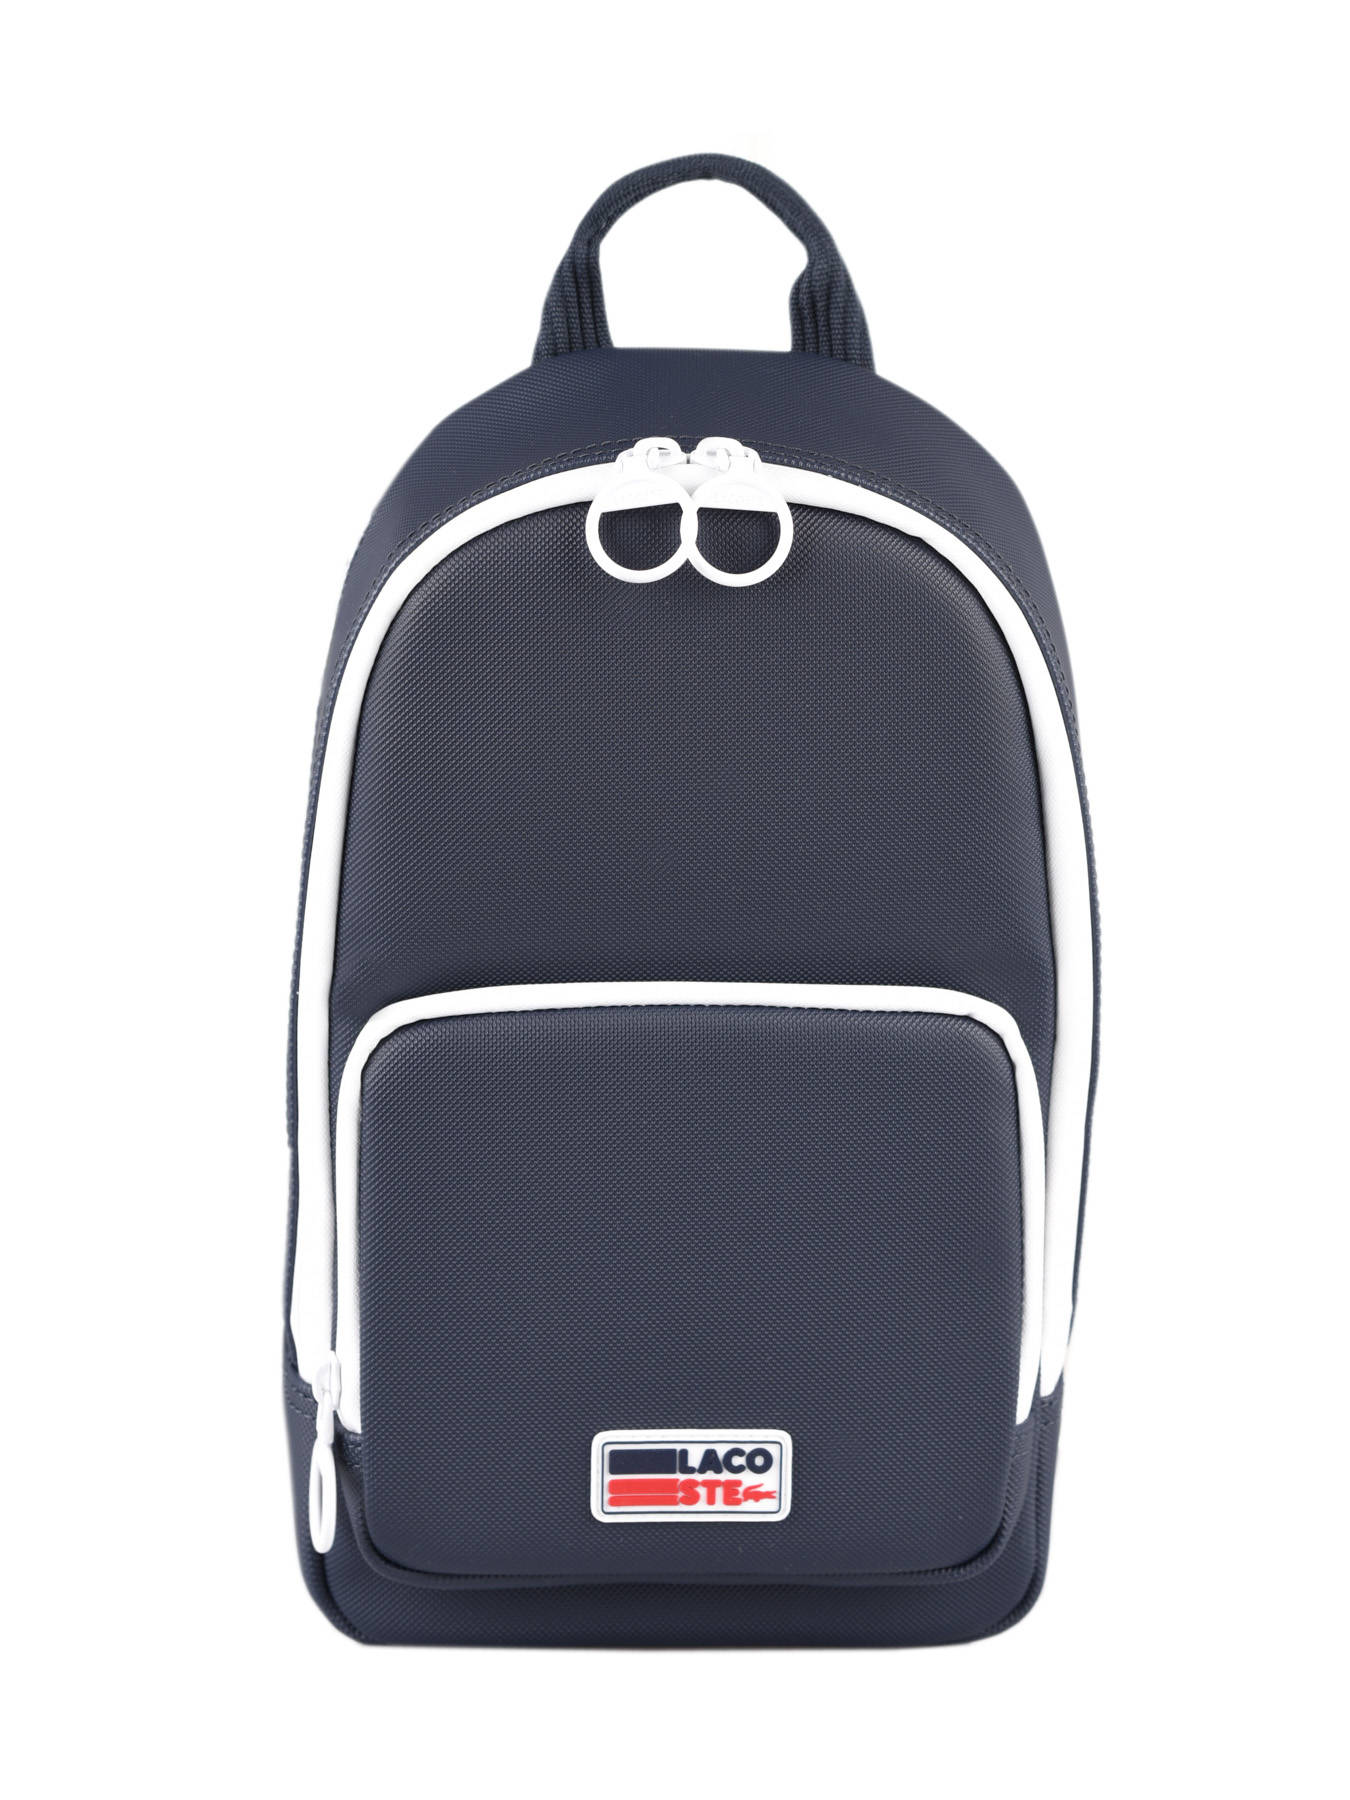 lacoste backpack mens